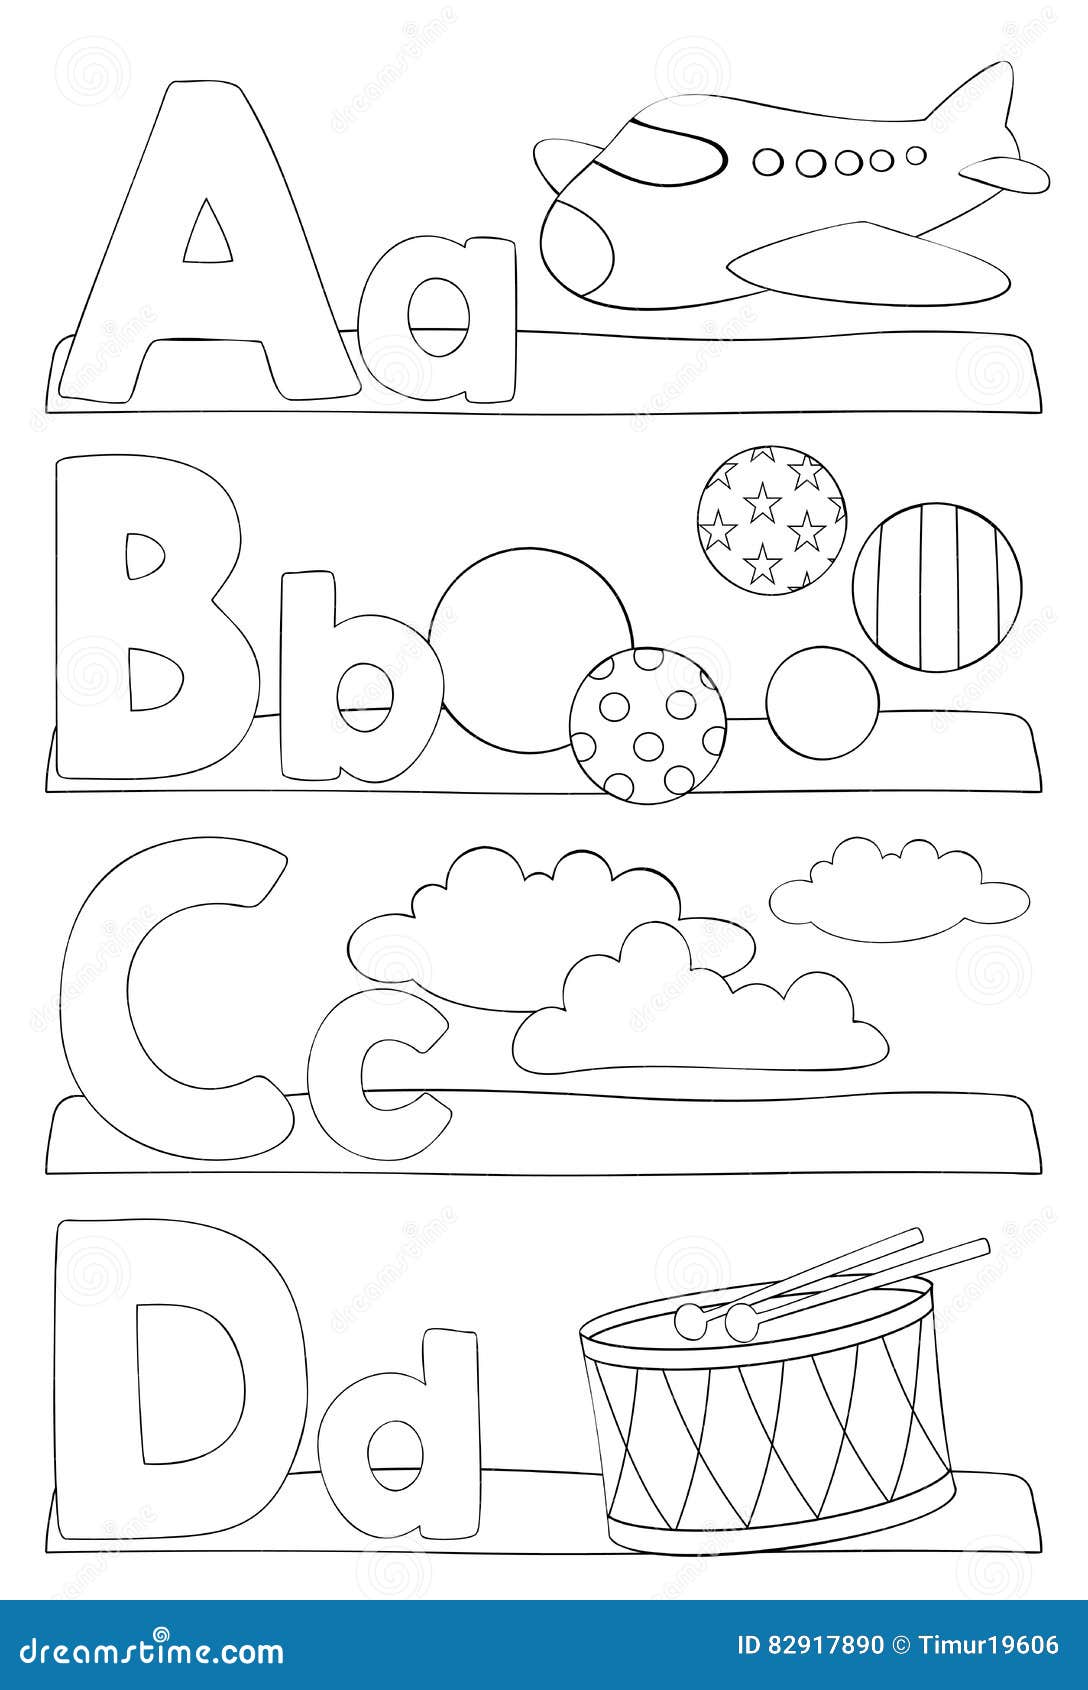 Coloring Pages Of Letters A B C - Coloring Pages